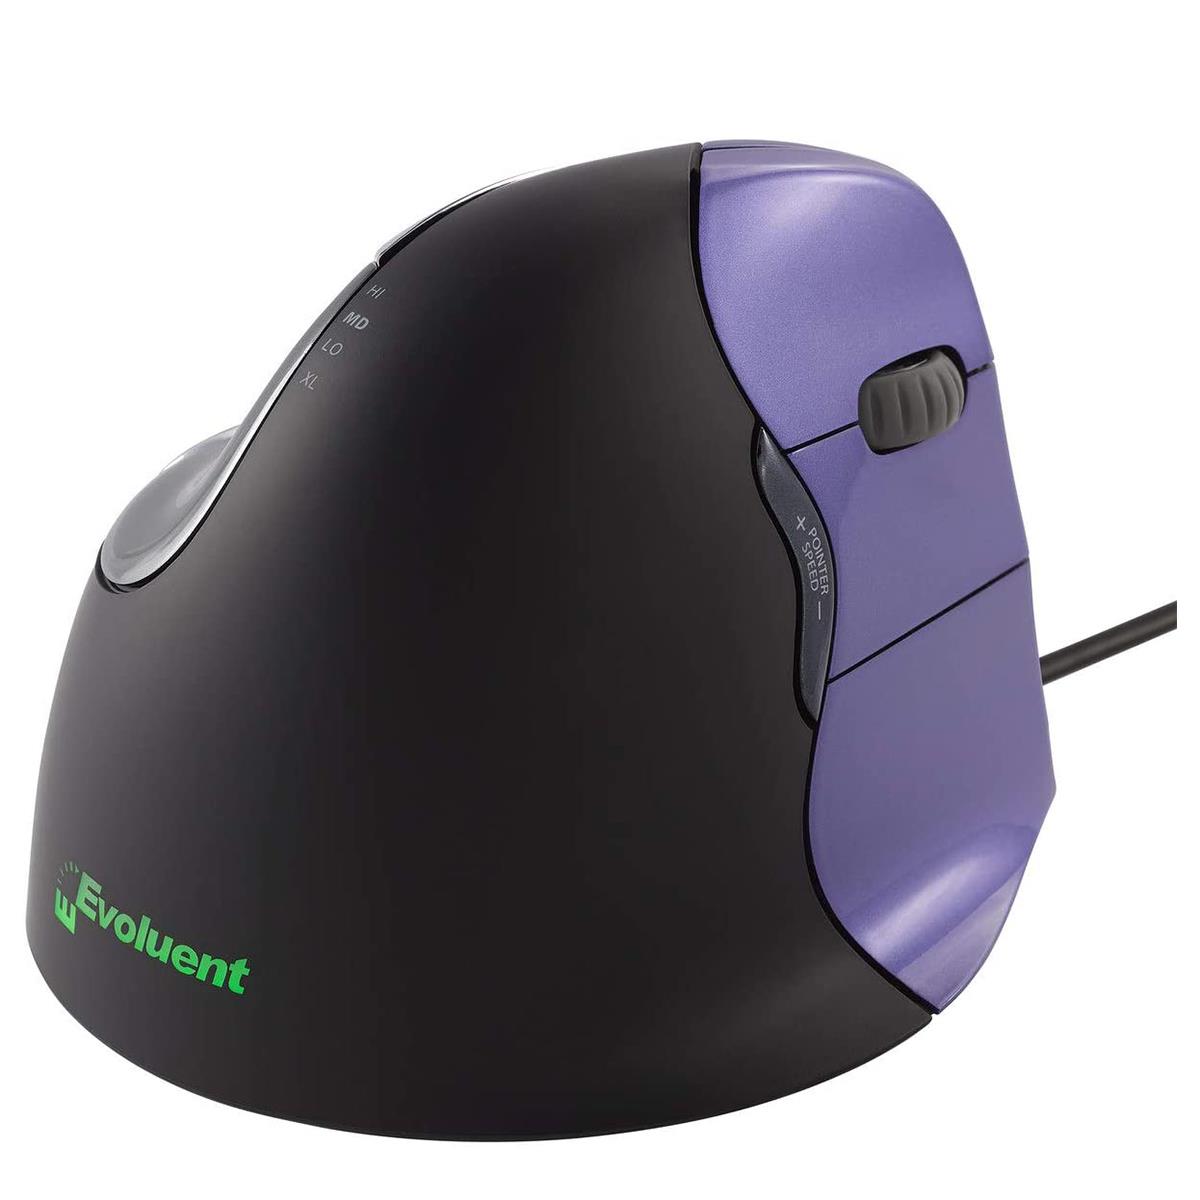 Image of Evoluent VerticalMouse 4 Ergonomic Wired Mouse